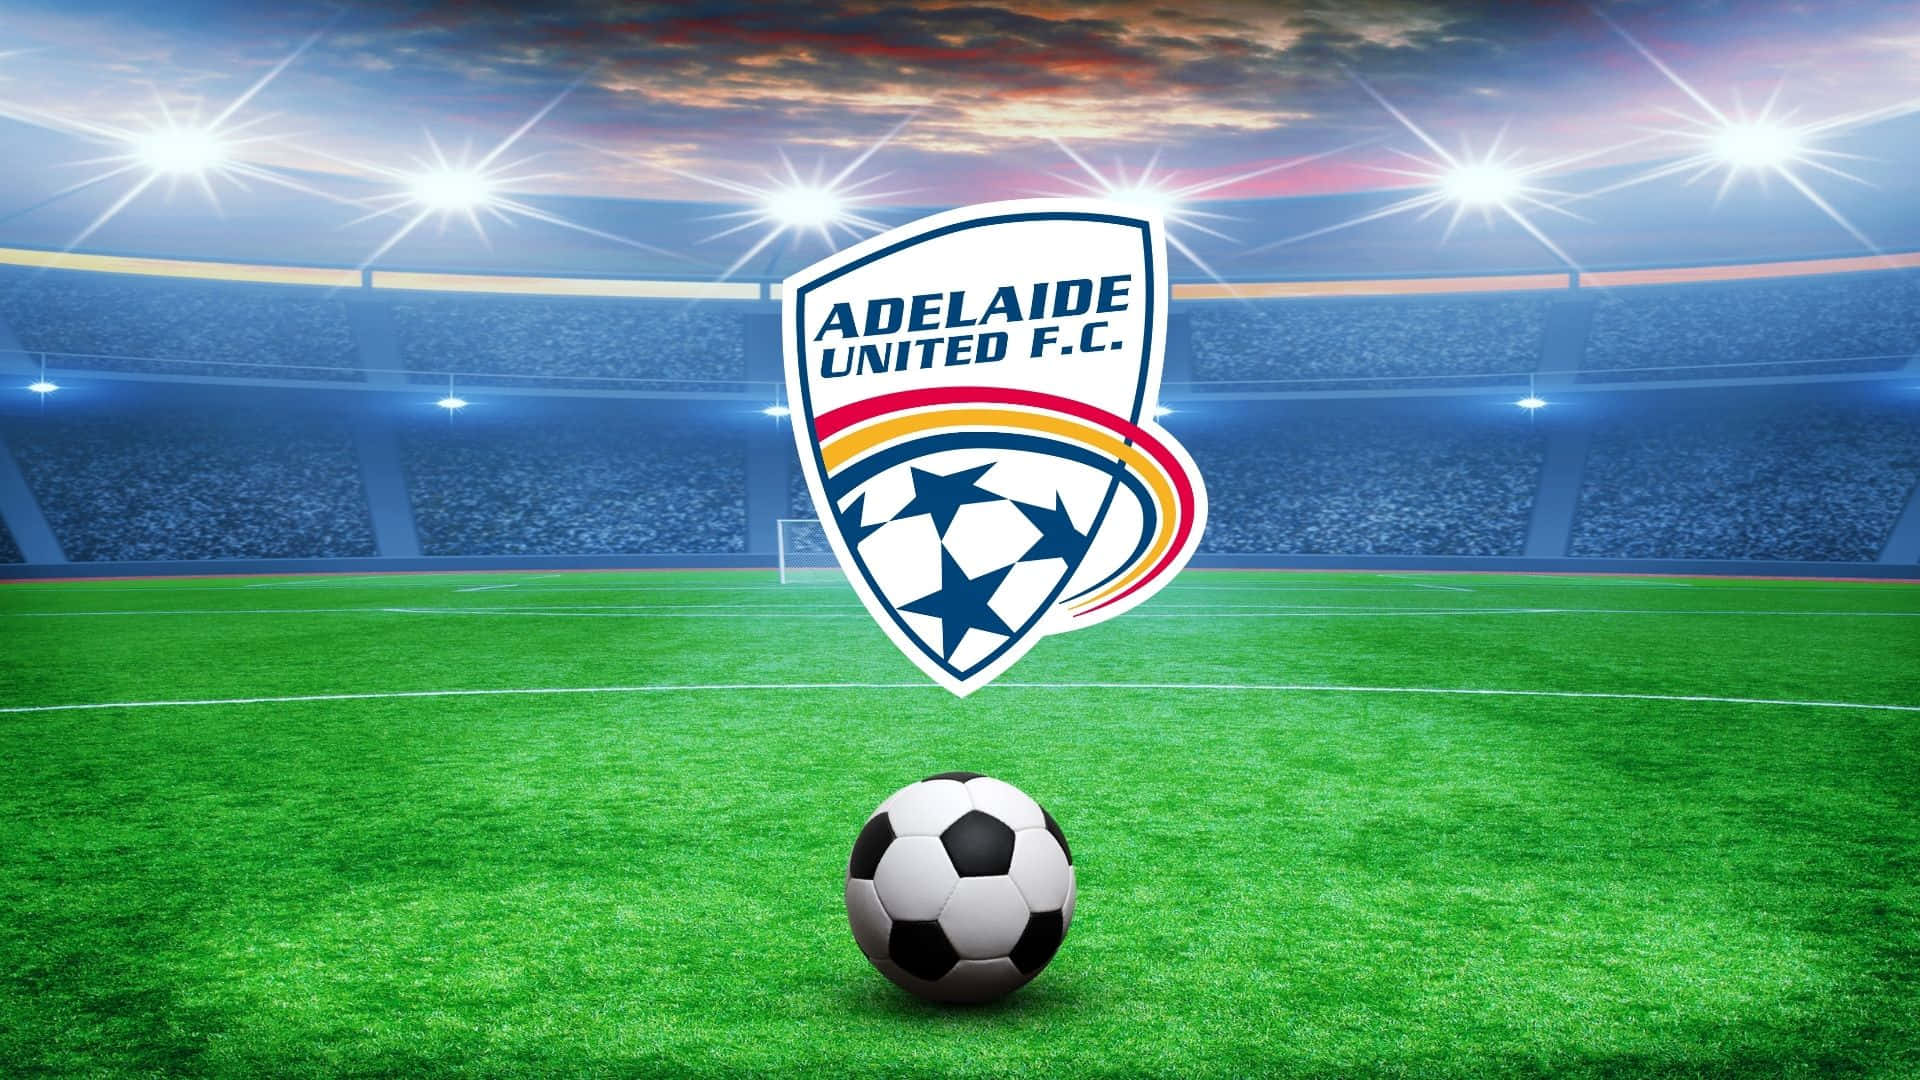 Adelaide United in action on the soccer field Wallpaper